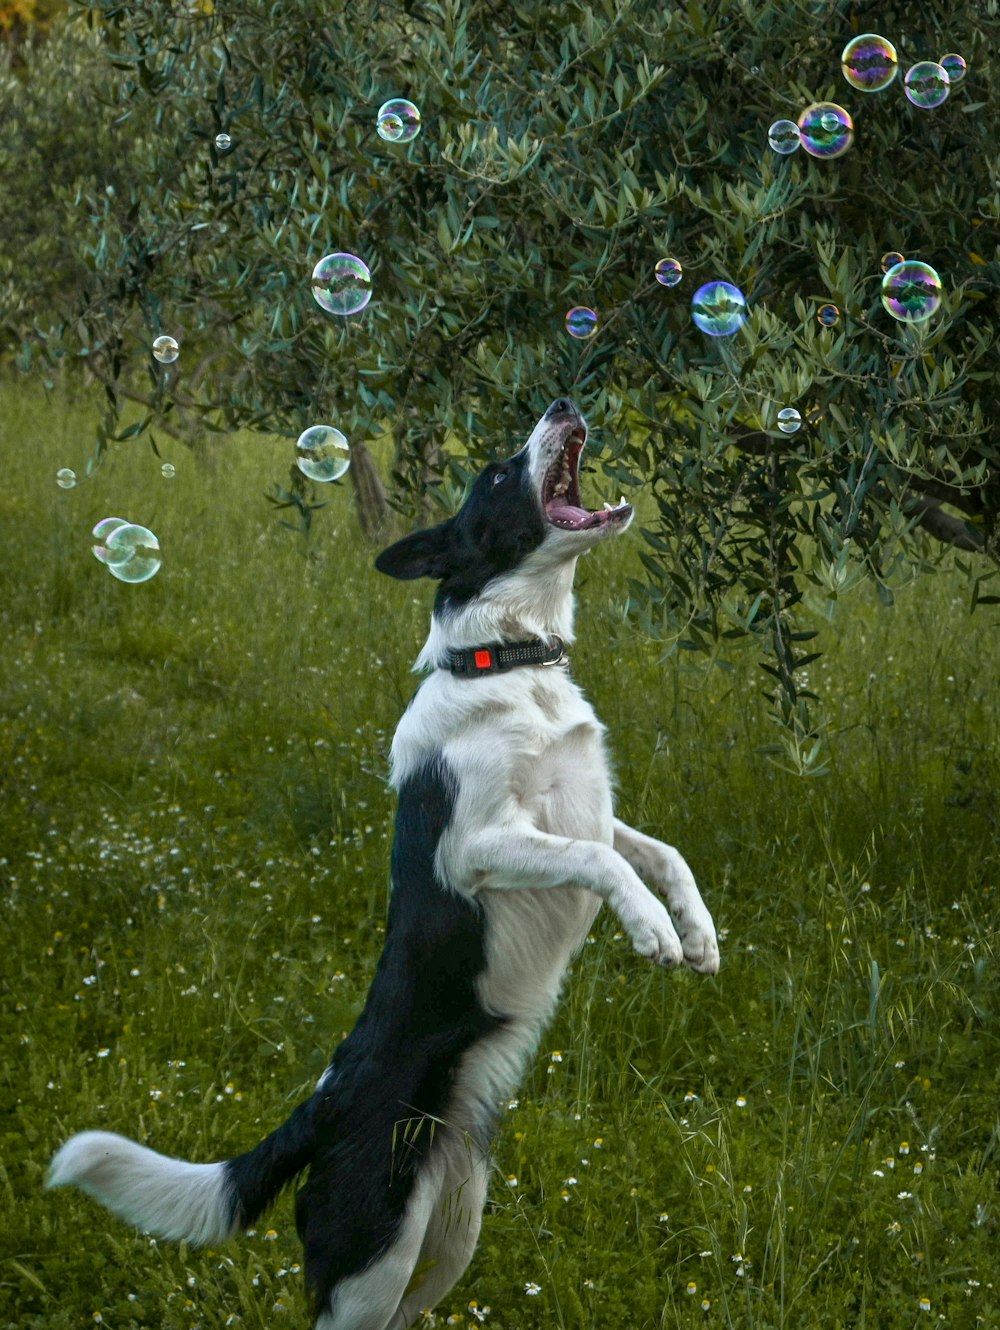 a black and white dog jumping in the air to catch a bubble